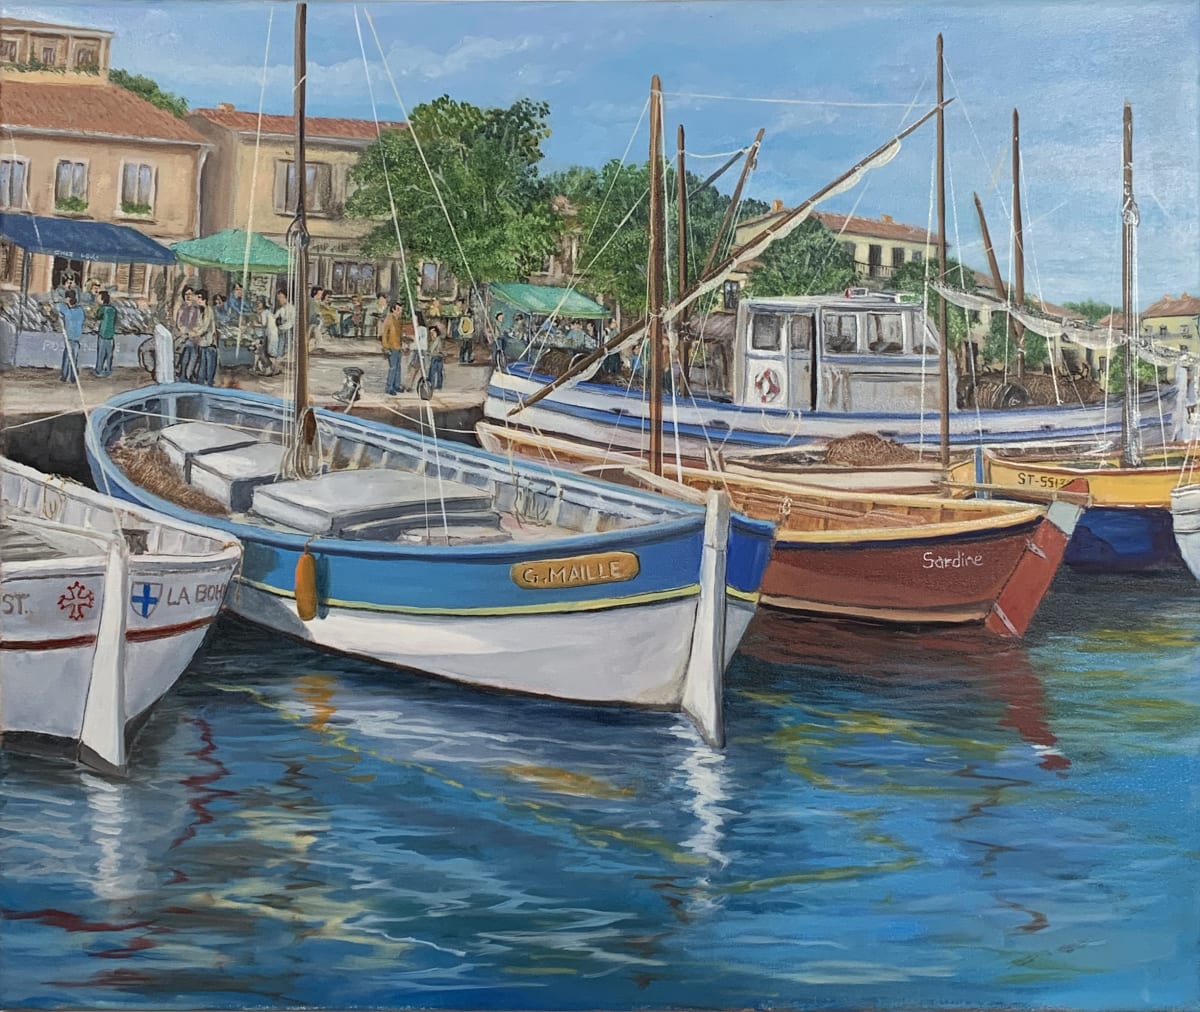 Fish Market Day by Gerard  Image:  "Fish Market Day" is a vibrant and detailed painting of a coastal scene, capturing the essence of Mediterranean coastal town life.